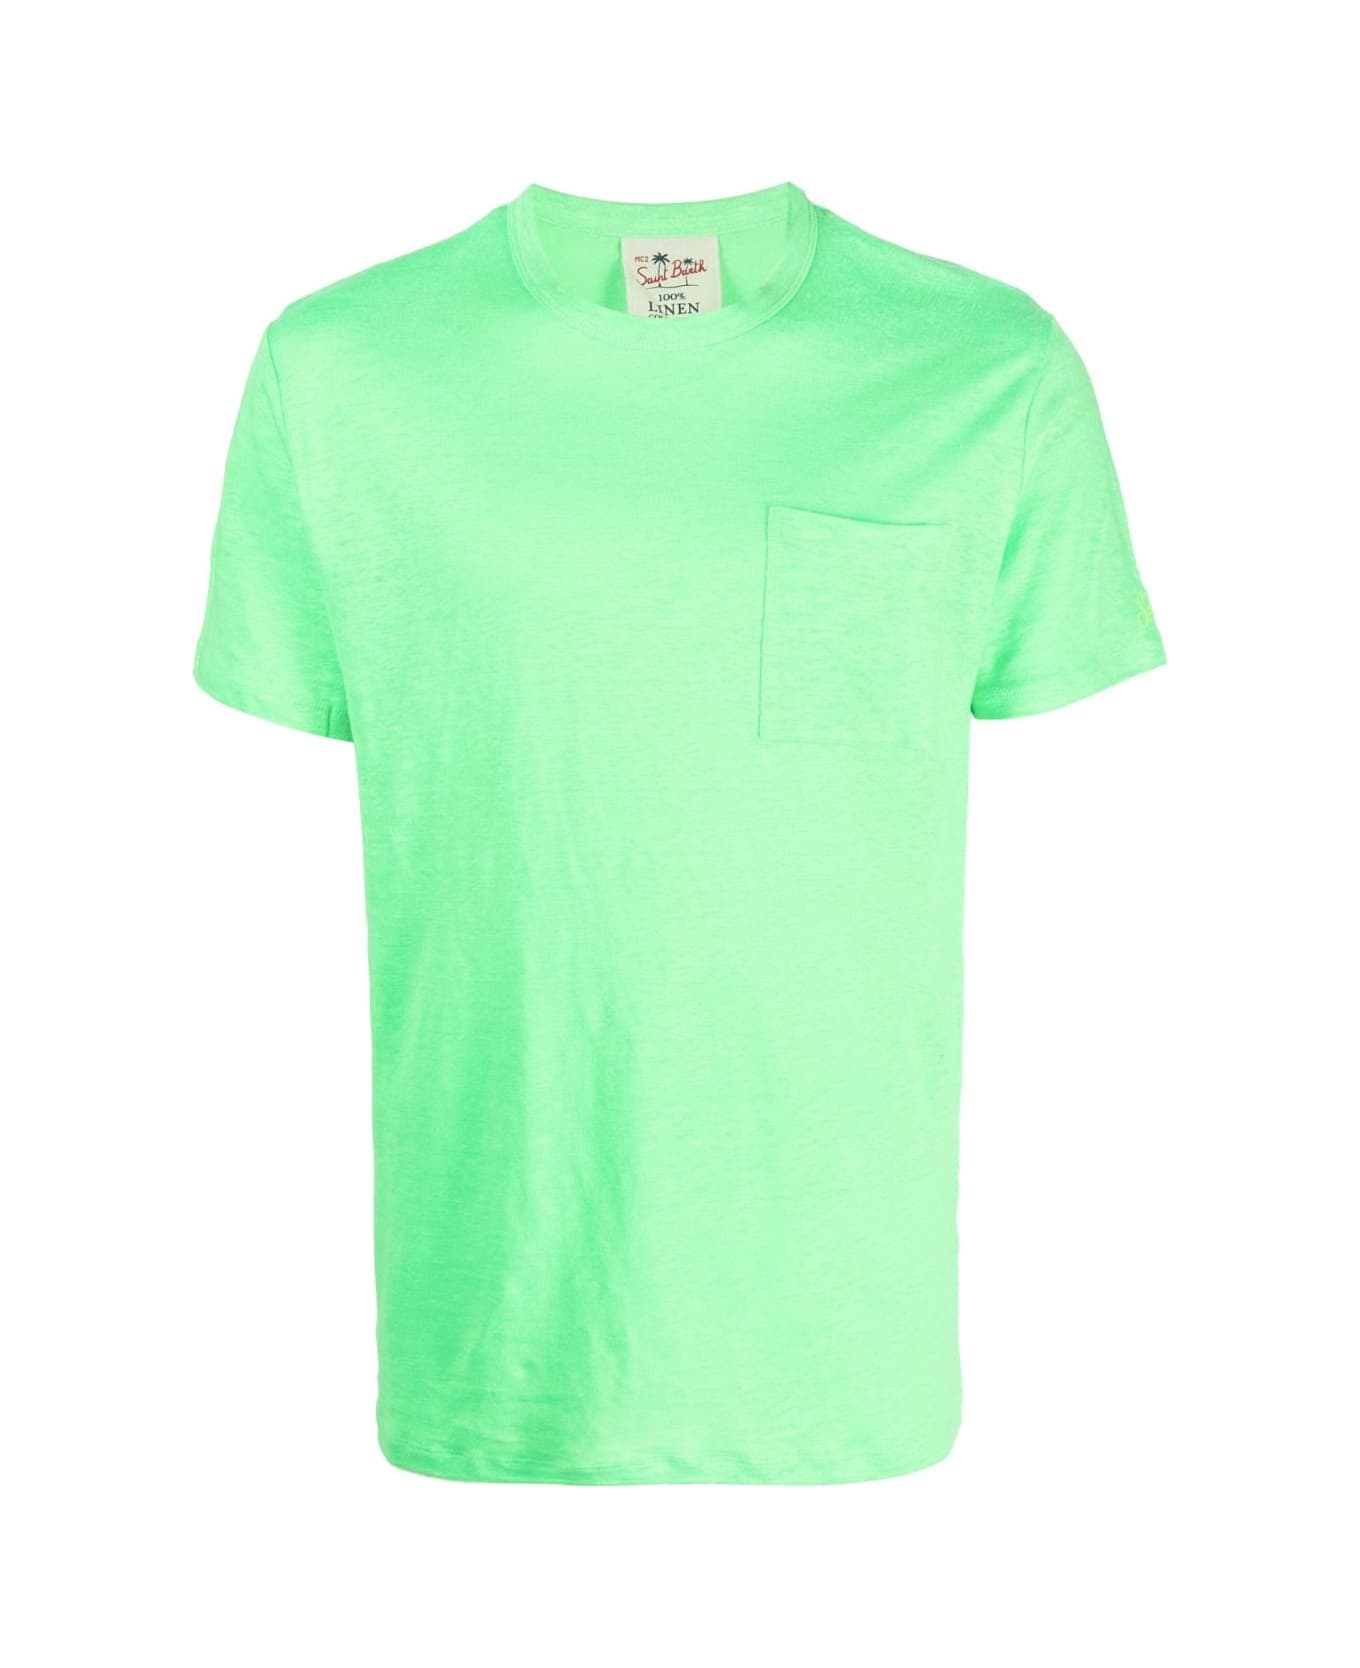 MC2 Saint Barth Linent-shirt With Front Pocket - Fluo Green シャツ